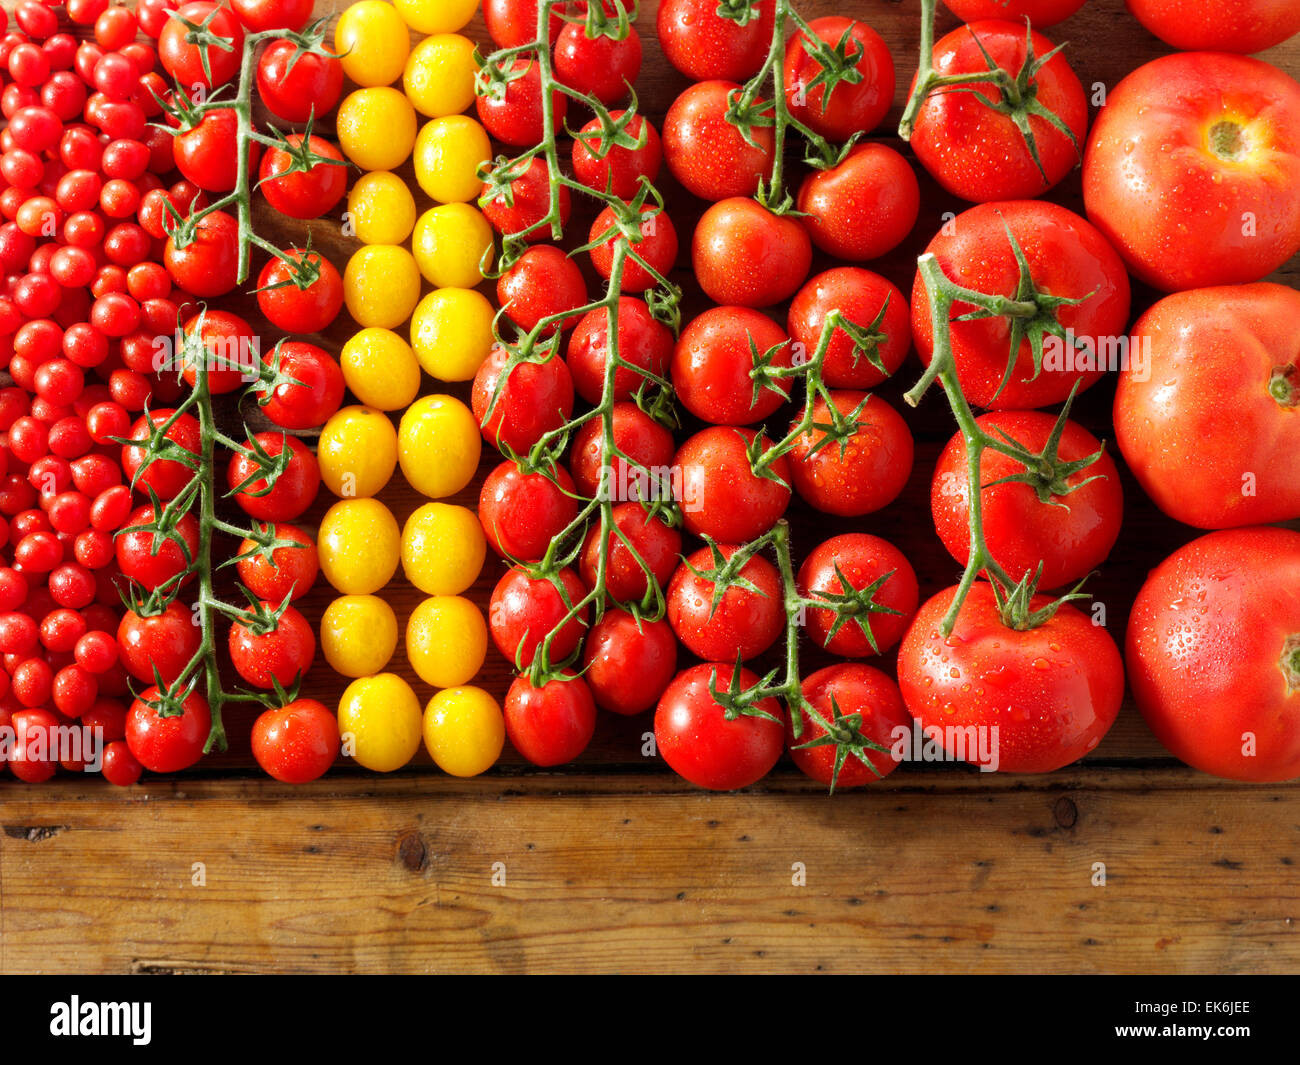 Mixed whole fresh yellow & red tomatoes on vines Stock Photo